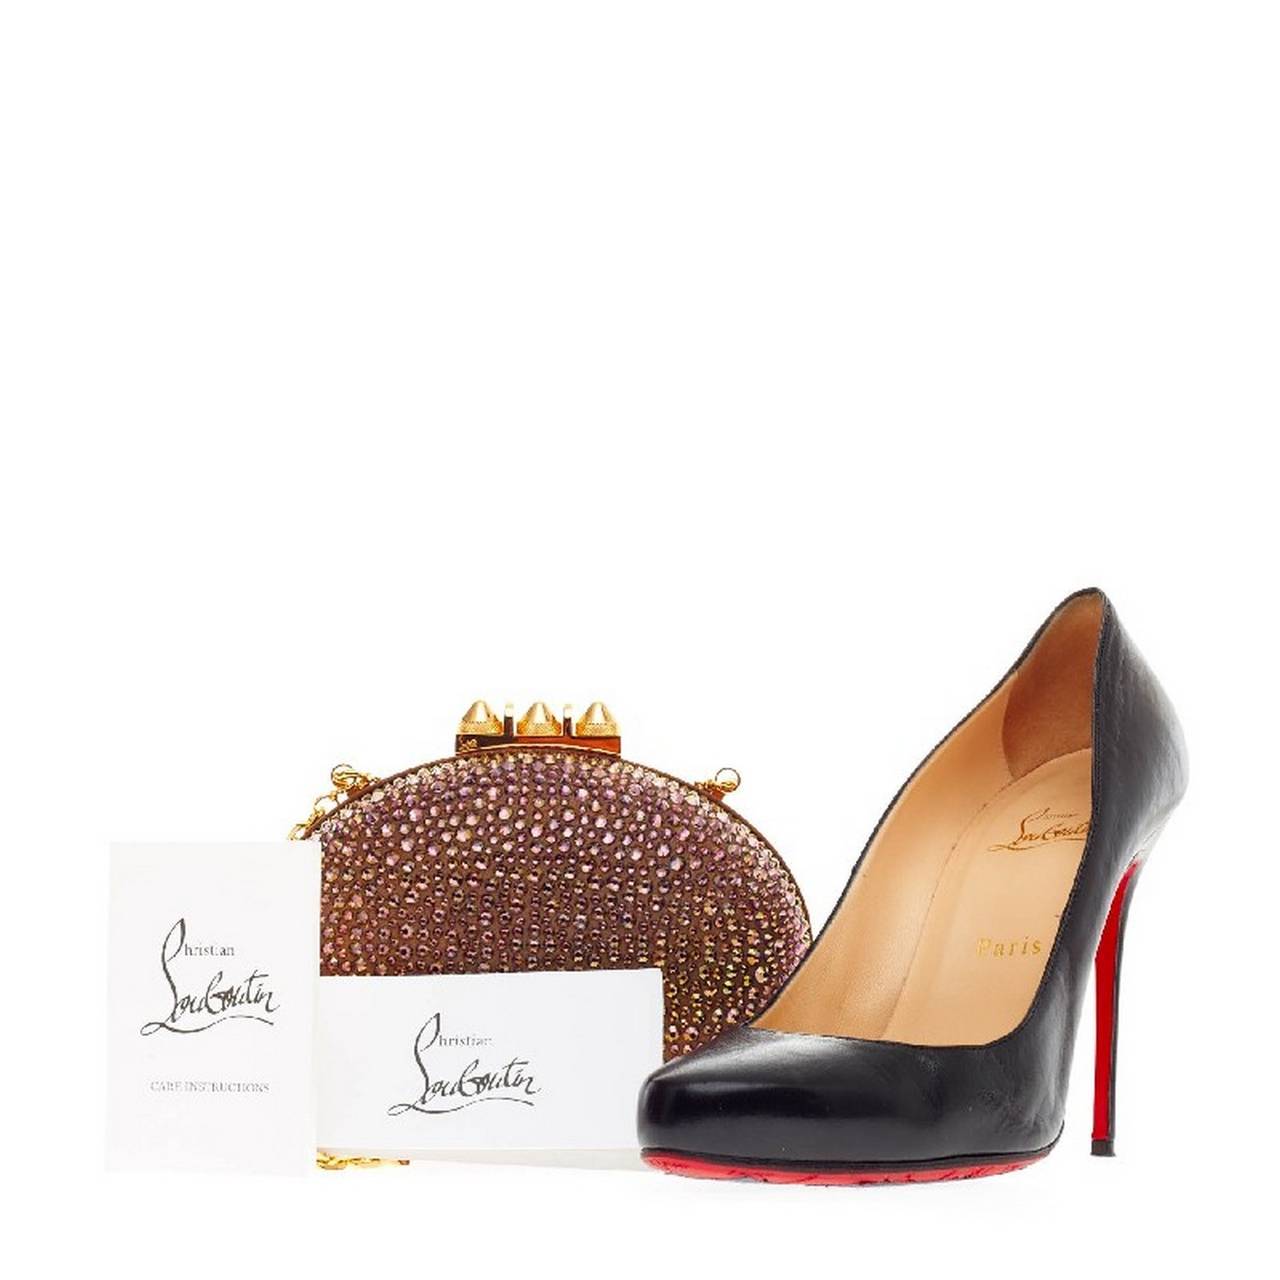 This authentic Christian Louboutin Mina Clutch Strass is a must-have accessory for any formal or evening event. Decorated in luminescent dark metallic purple and gold shade crystal embellishment, this eye-catching rounded clutch features